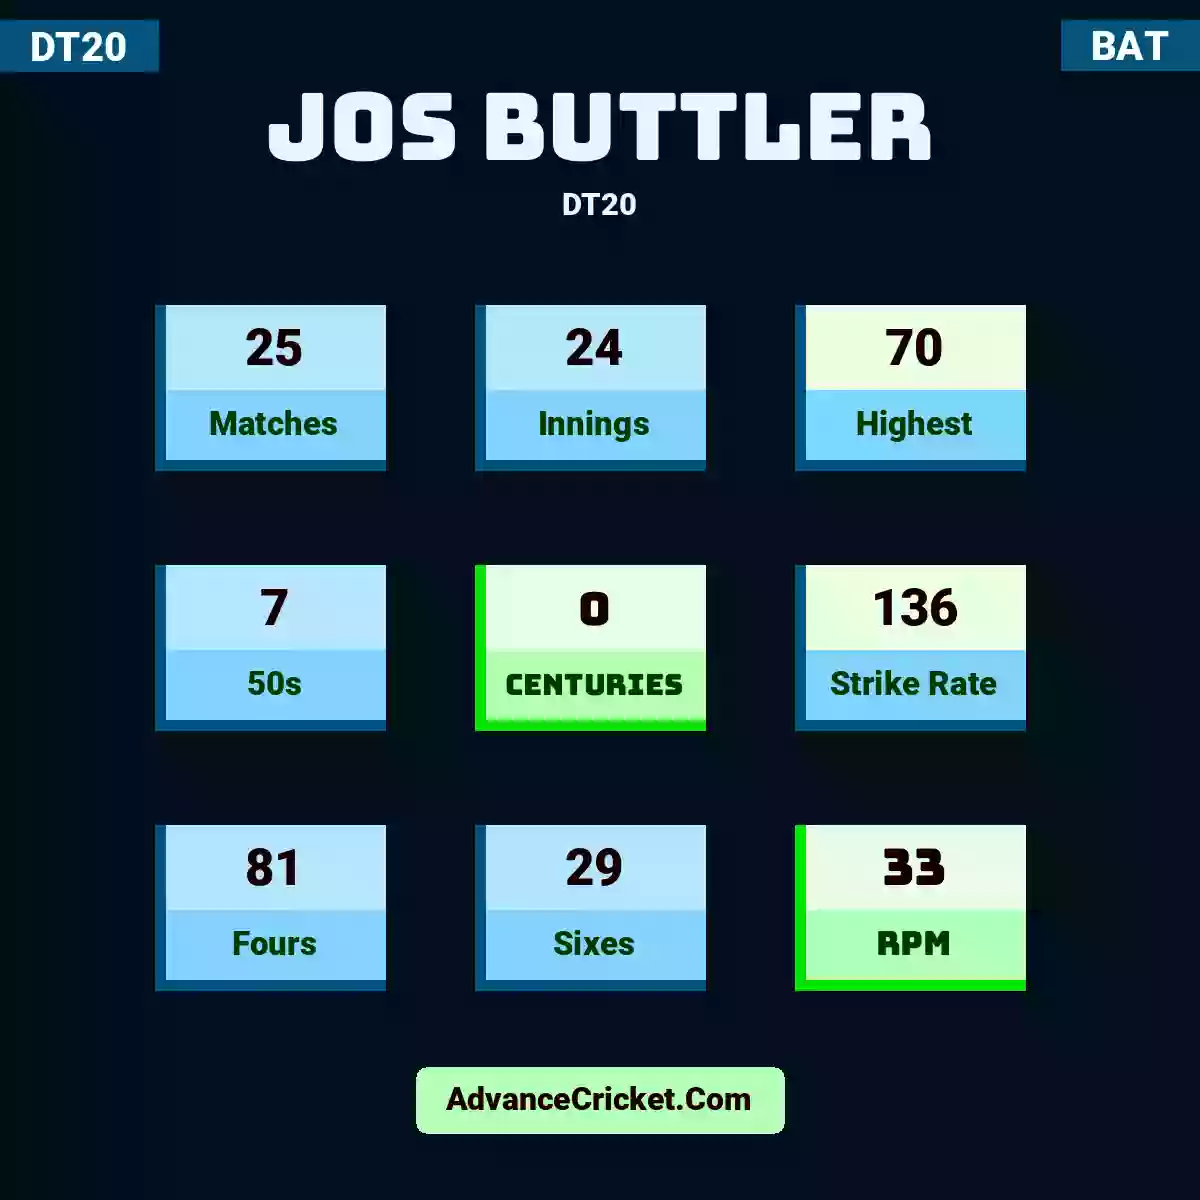 Jos Buttler DT20 , Jos Buttler played 25 matches, scored 70 runs as highest, 7 half-centuries, and 0 centuries, with a strike rate of 136. J.Buttler hit 81 fours and 29 sixes, with an RPM of 33.